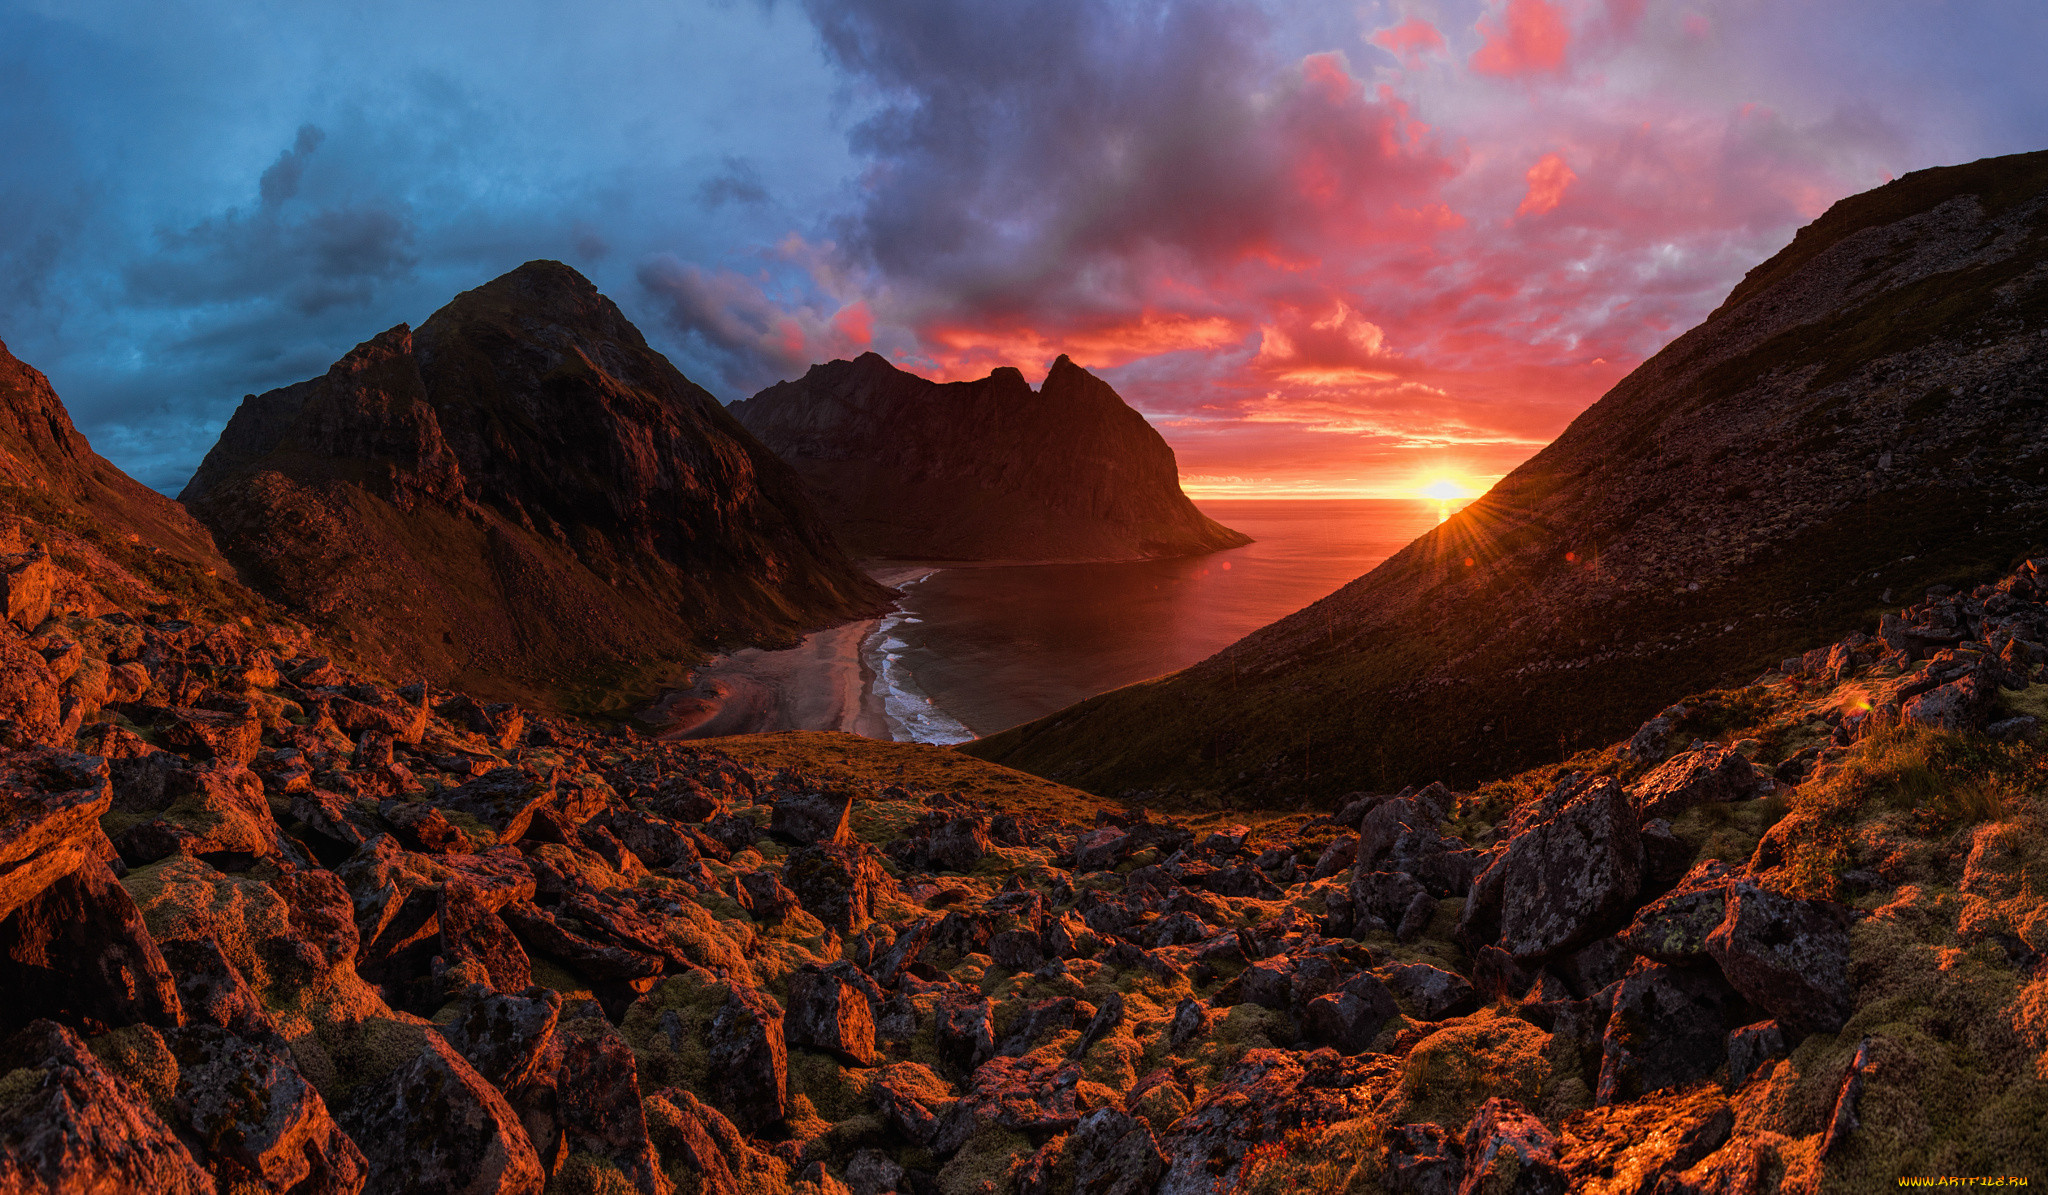 , , , sunset, sea, sun, norway, landscapes, stones, rain, sky, clouds, landscape, red, northern, mountains